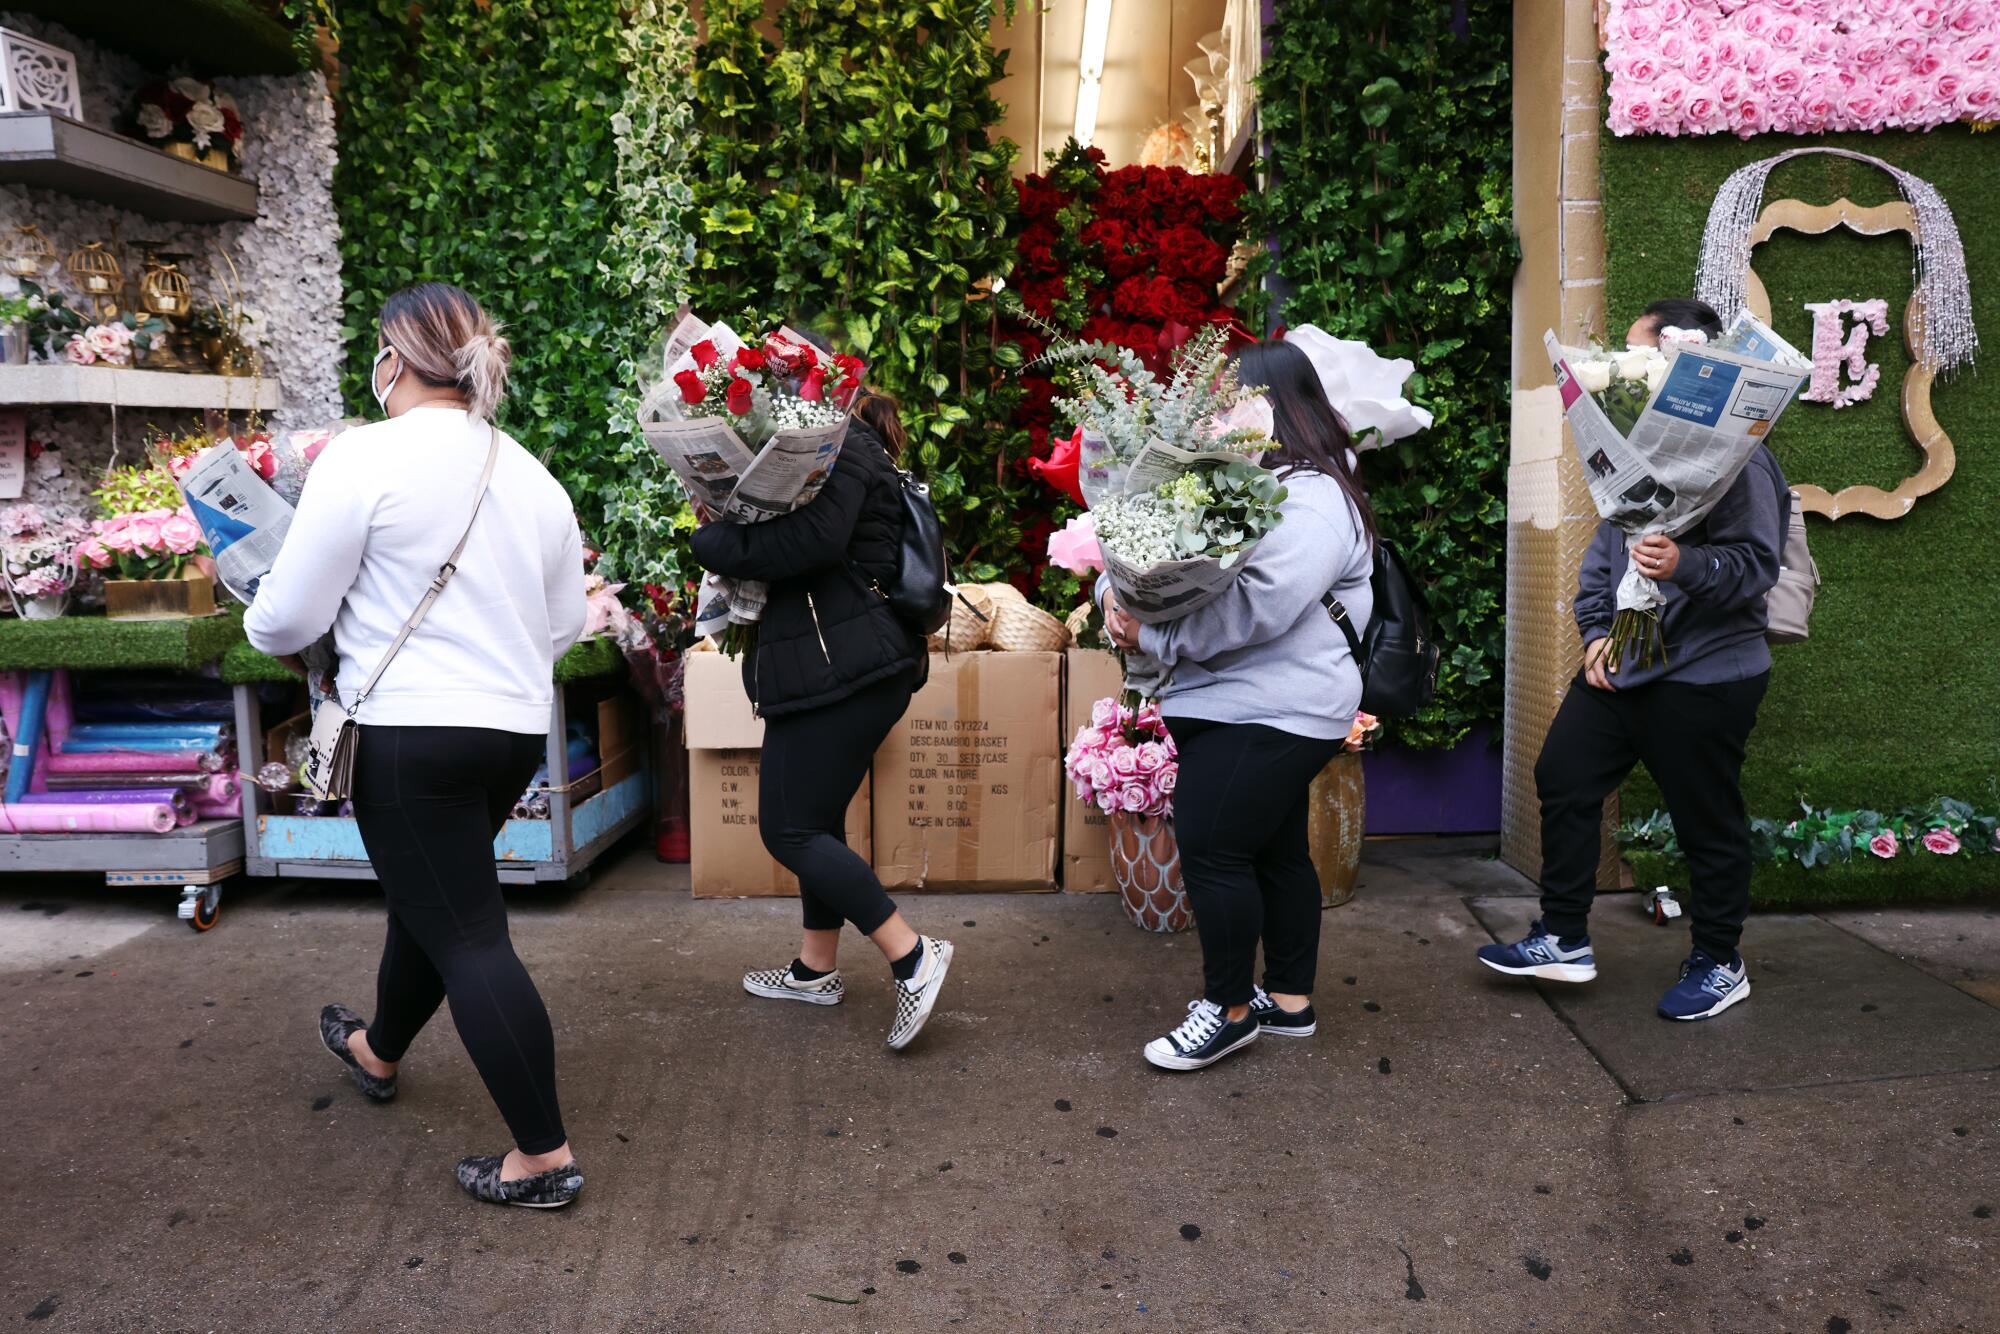 People exit the Los Angeles Flower Market with their purchases.